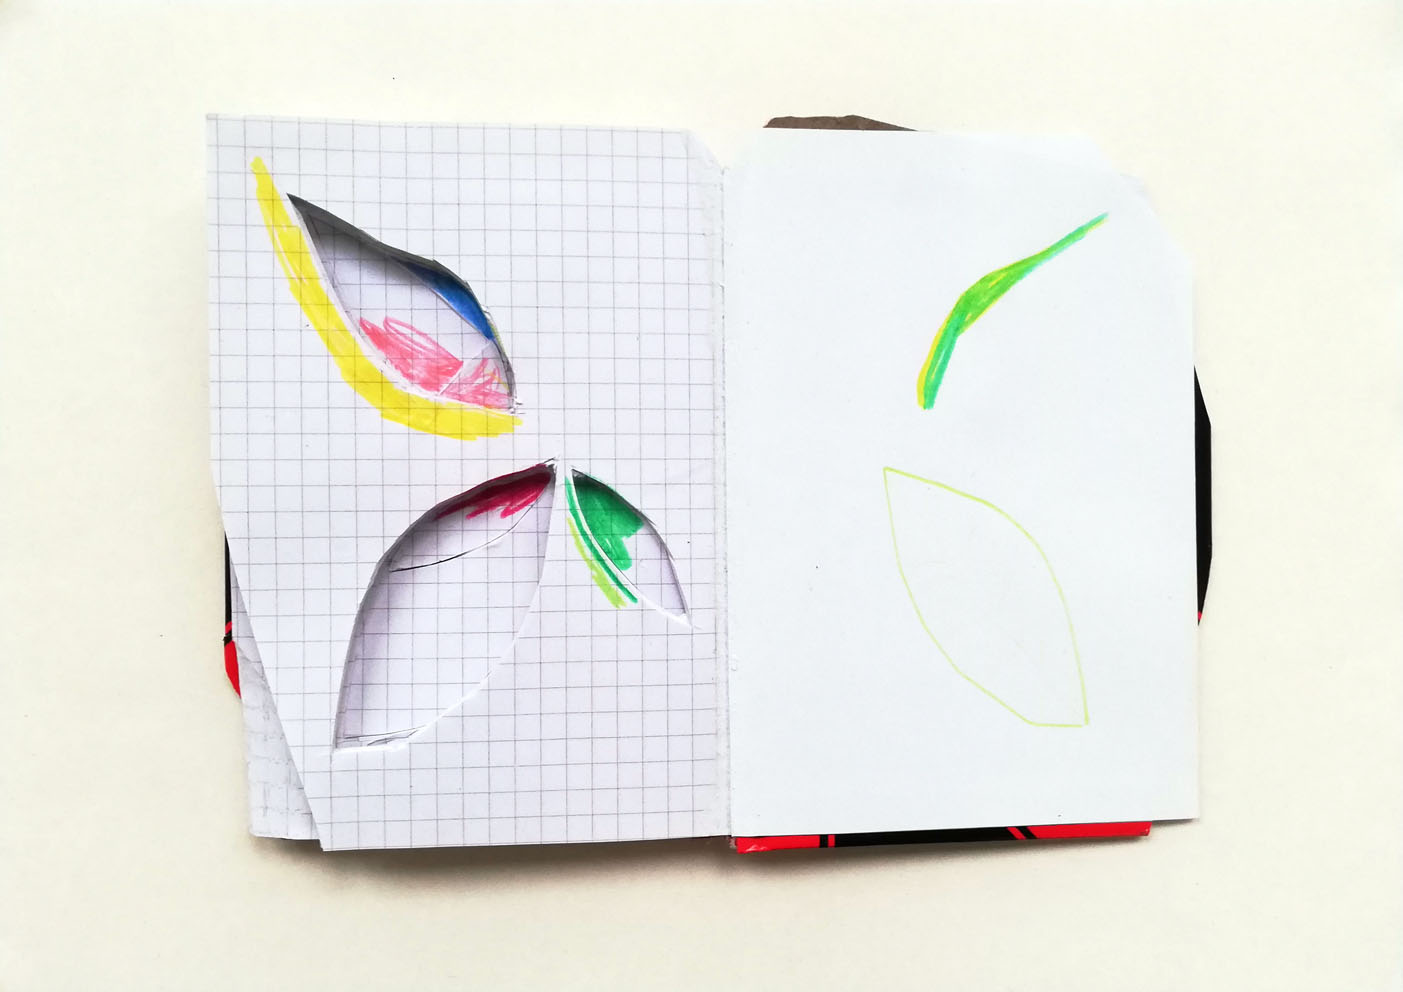 THE ABSTRACT GARDEN, 14,6 x 20,4 cm / closed14,6 x 10,2 cm, pencil, colored crayon in cut, collaged, glued chinese notebook, 2022/23